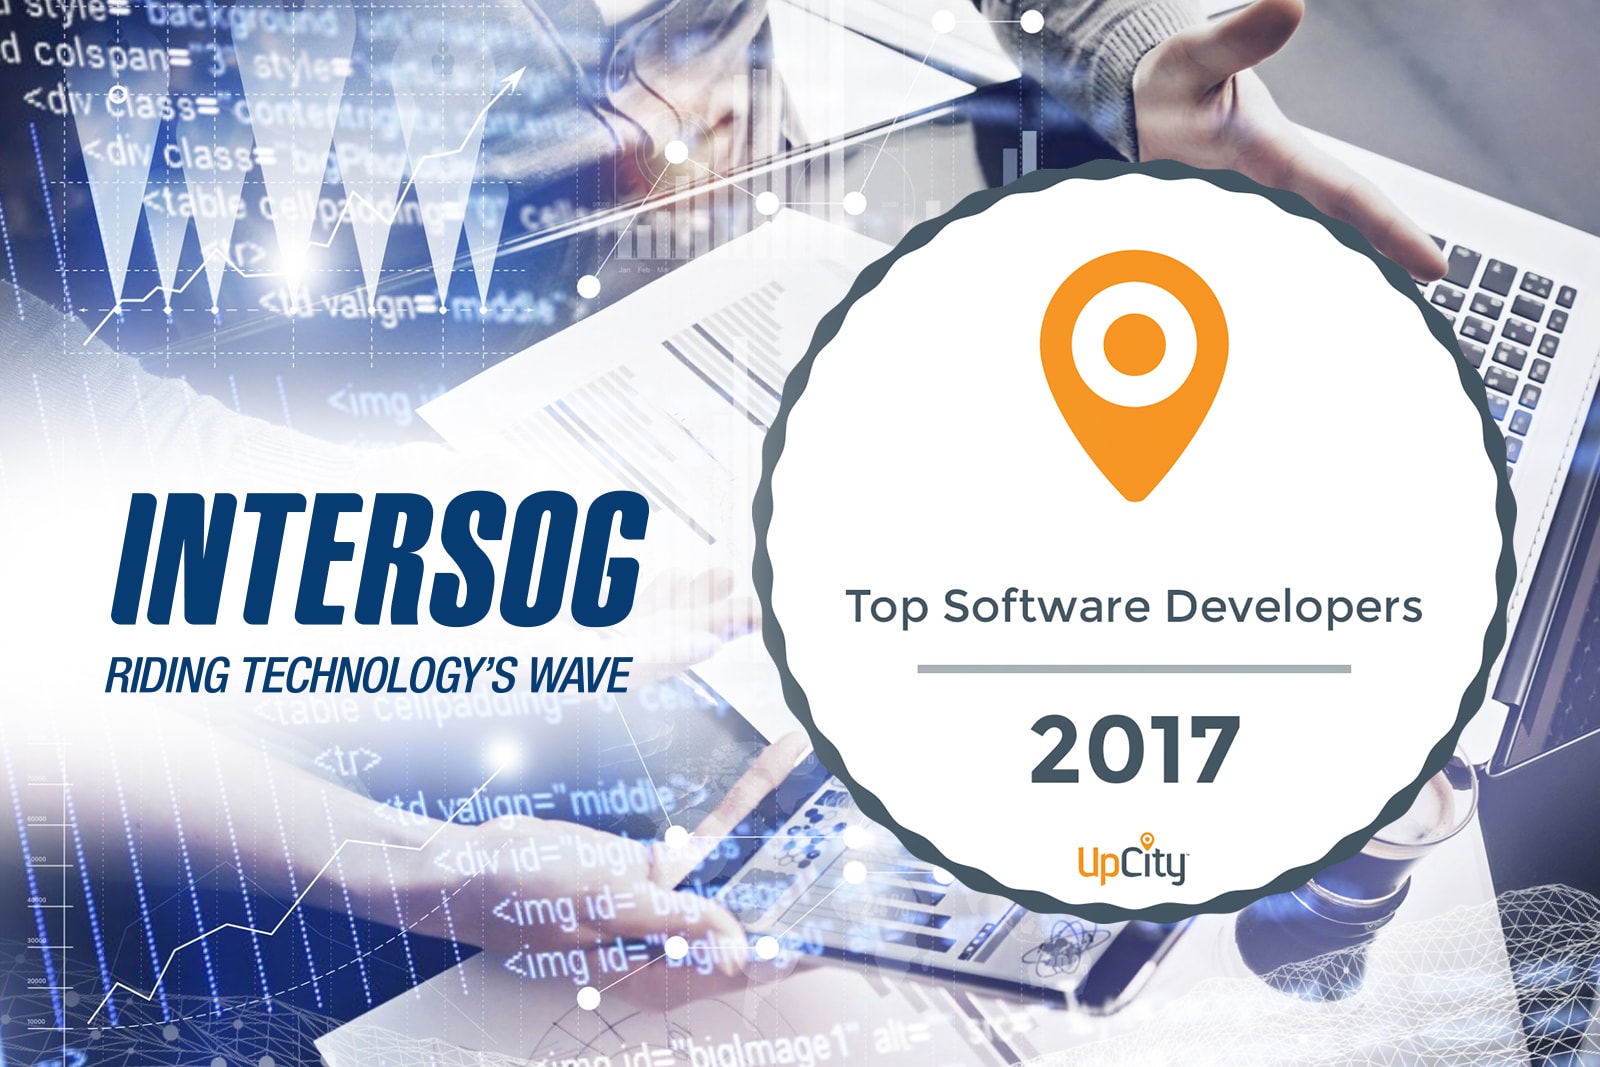 Upcity Recognizes Intersog As a Top Software Developer In Chicago and